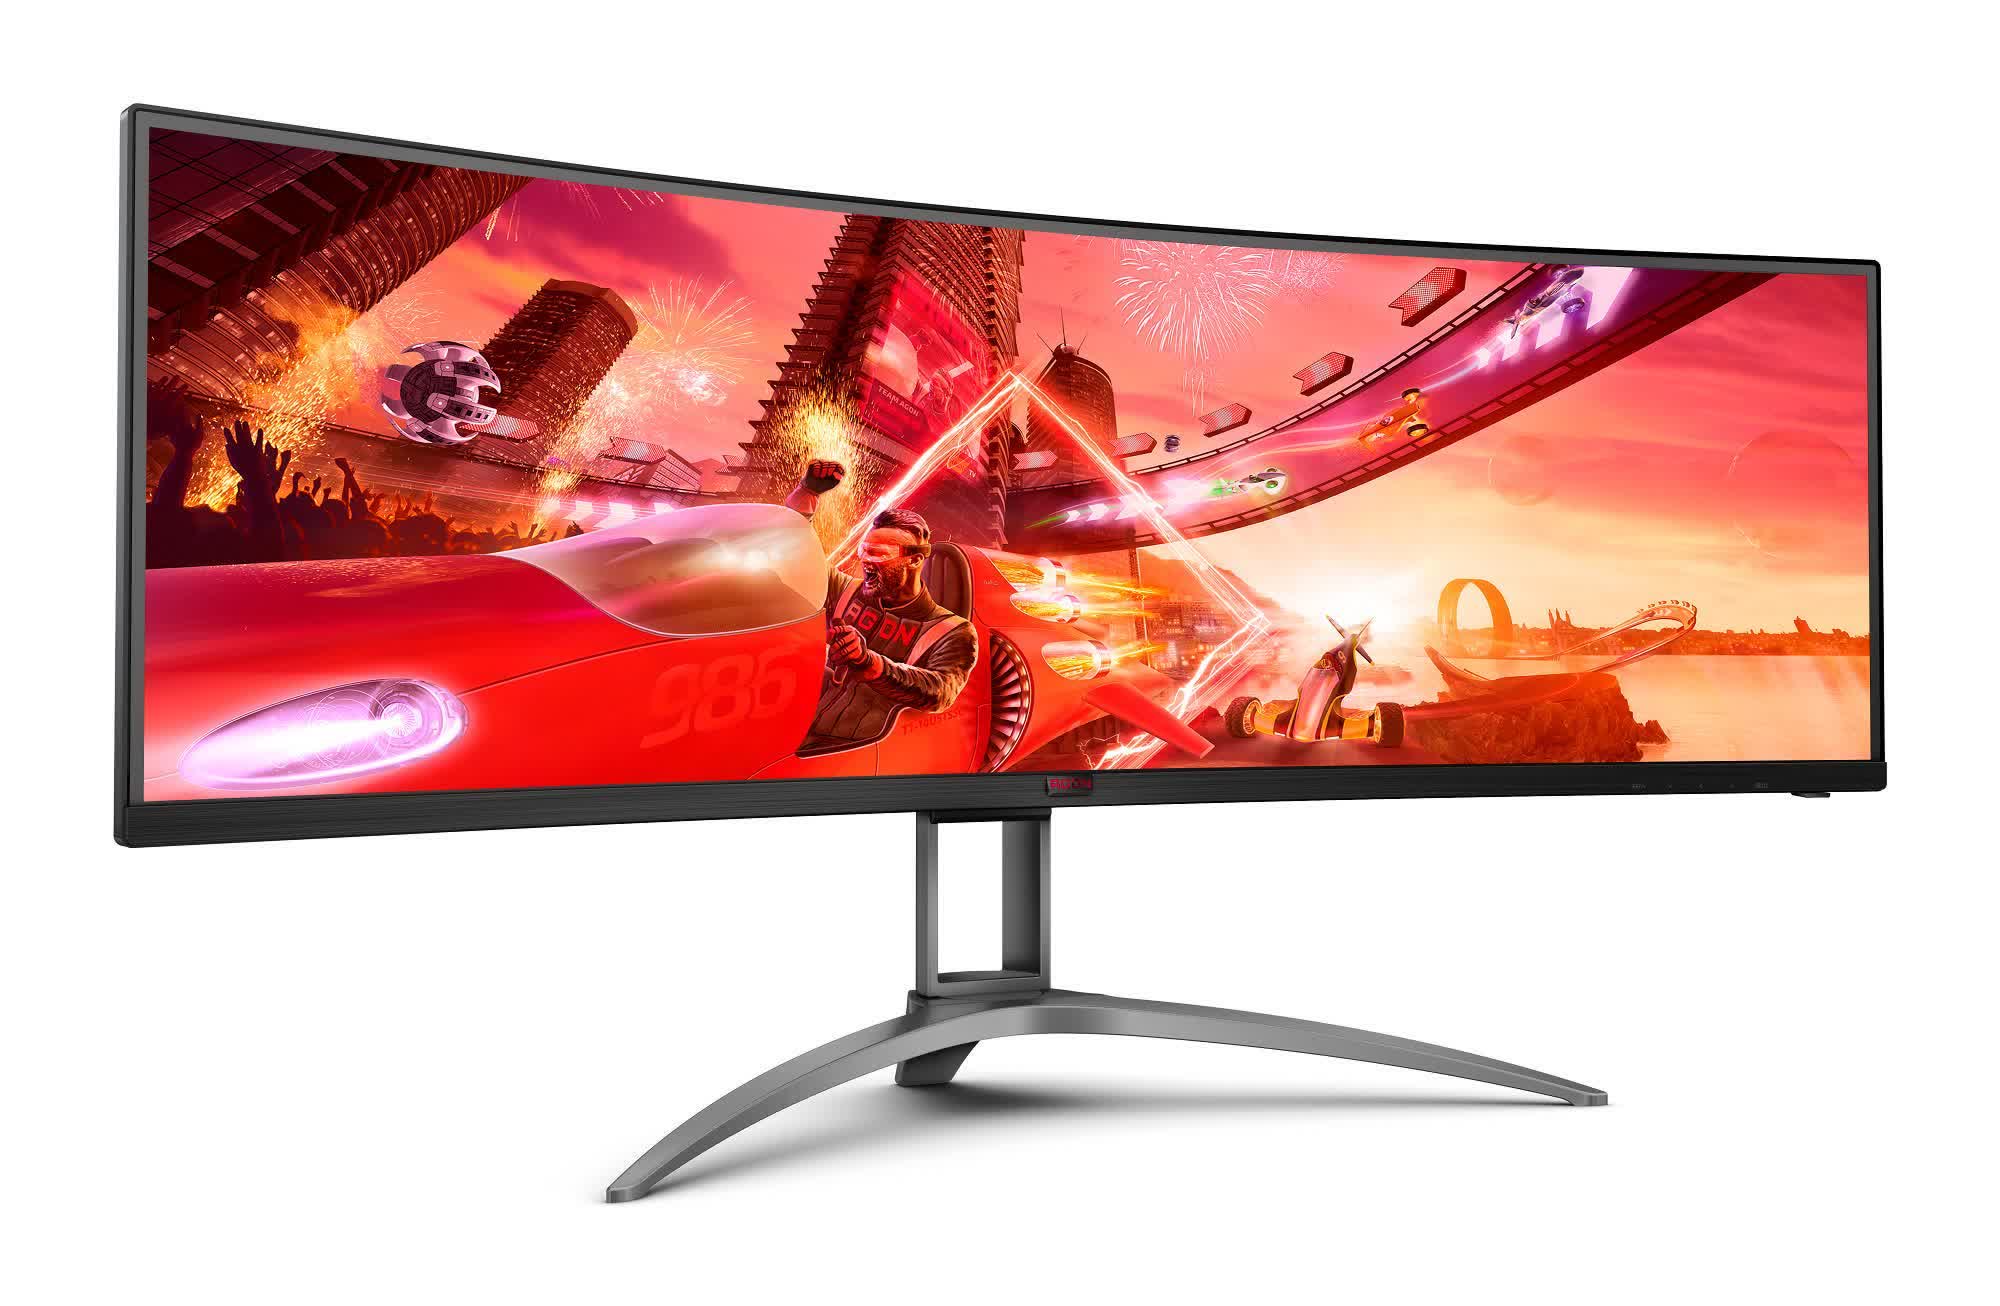 AOC unveils 49-inch 120Hz curved monitor